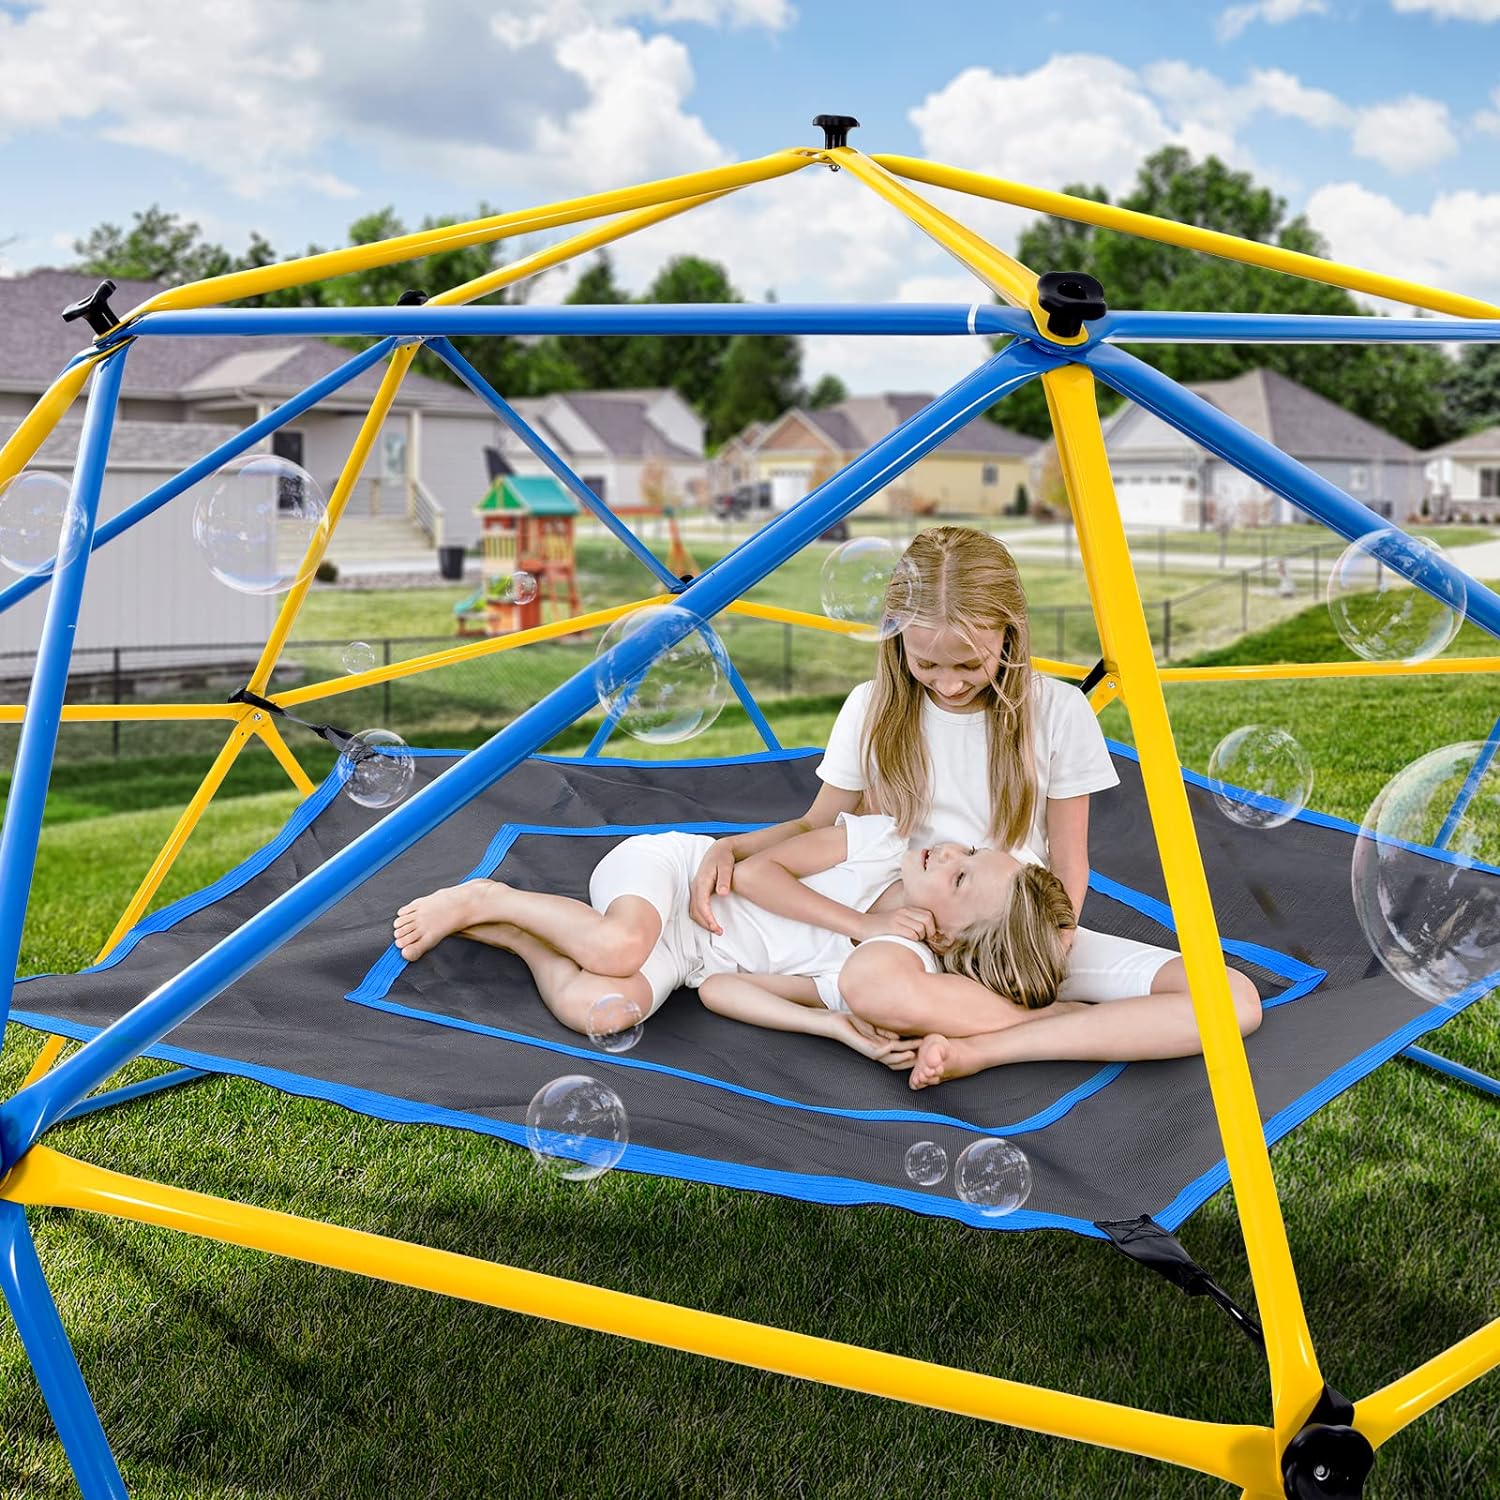 Upgraded 10FT Climbing Dome with Canopy and Swing, Dome Climber for Kids 3 - 10, Weight Capability 800LBS, Rust and UV Resistant Steel